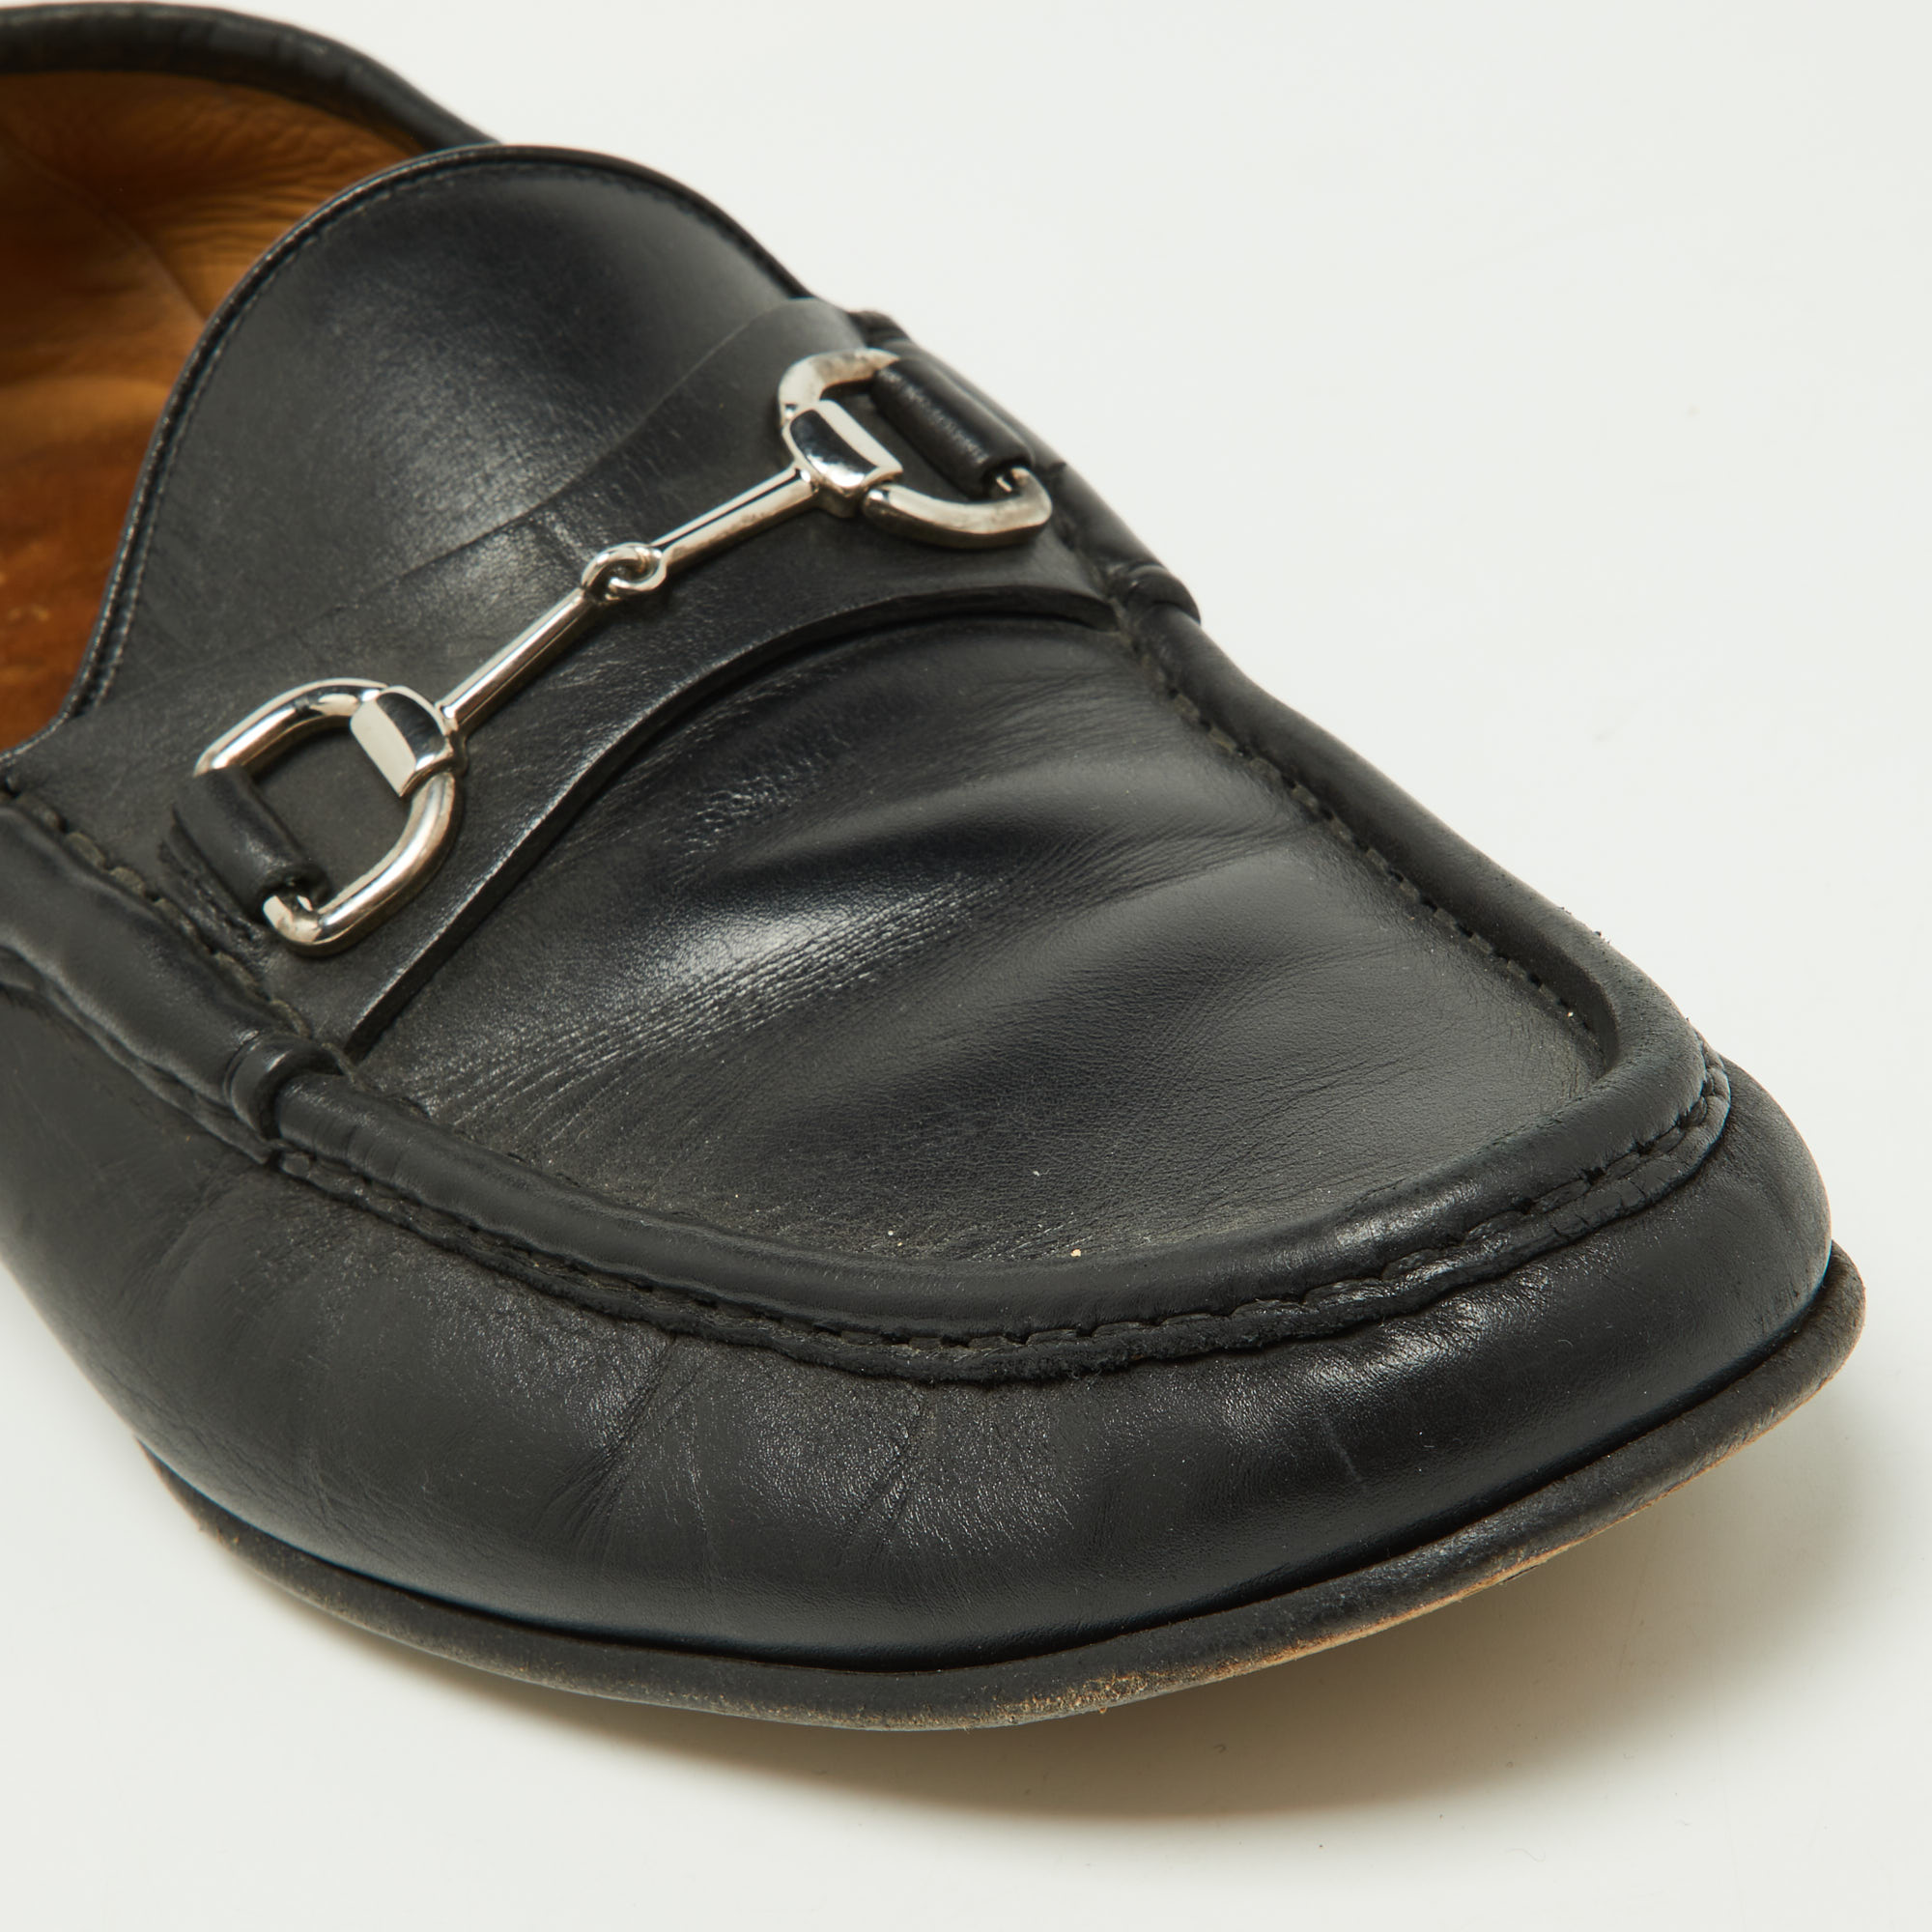 Gucci Black Leather Horsebit Loafers Size 44